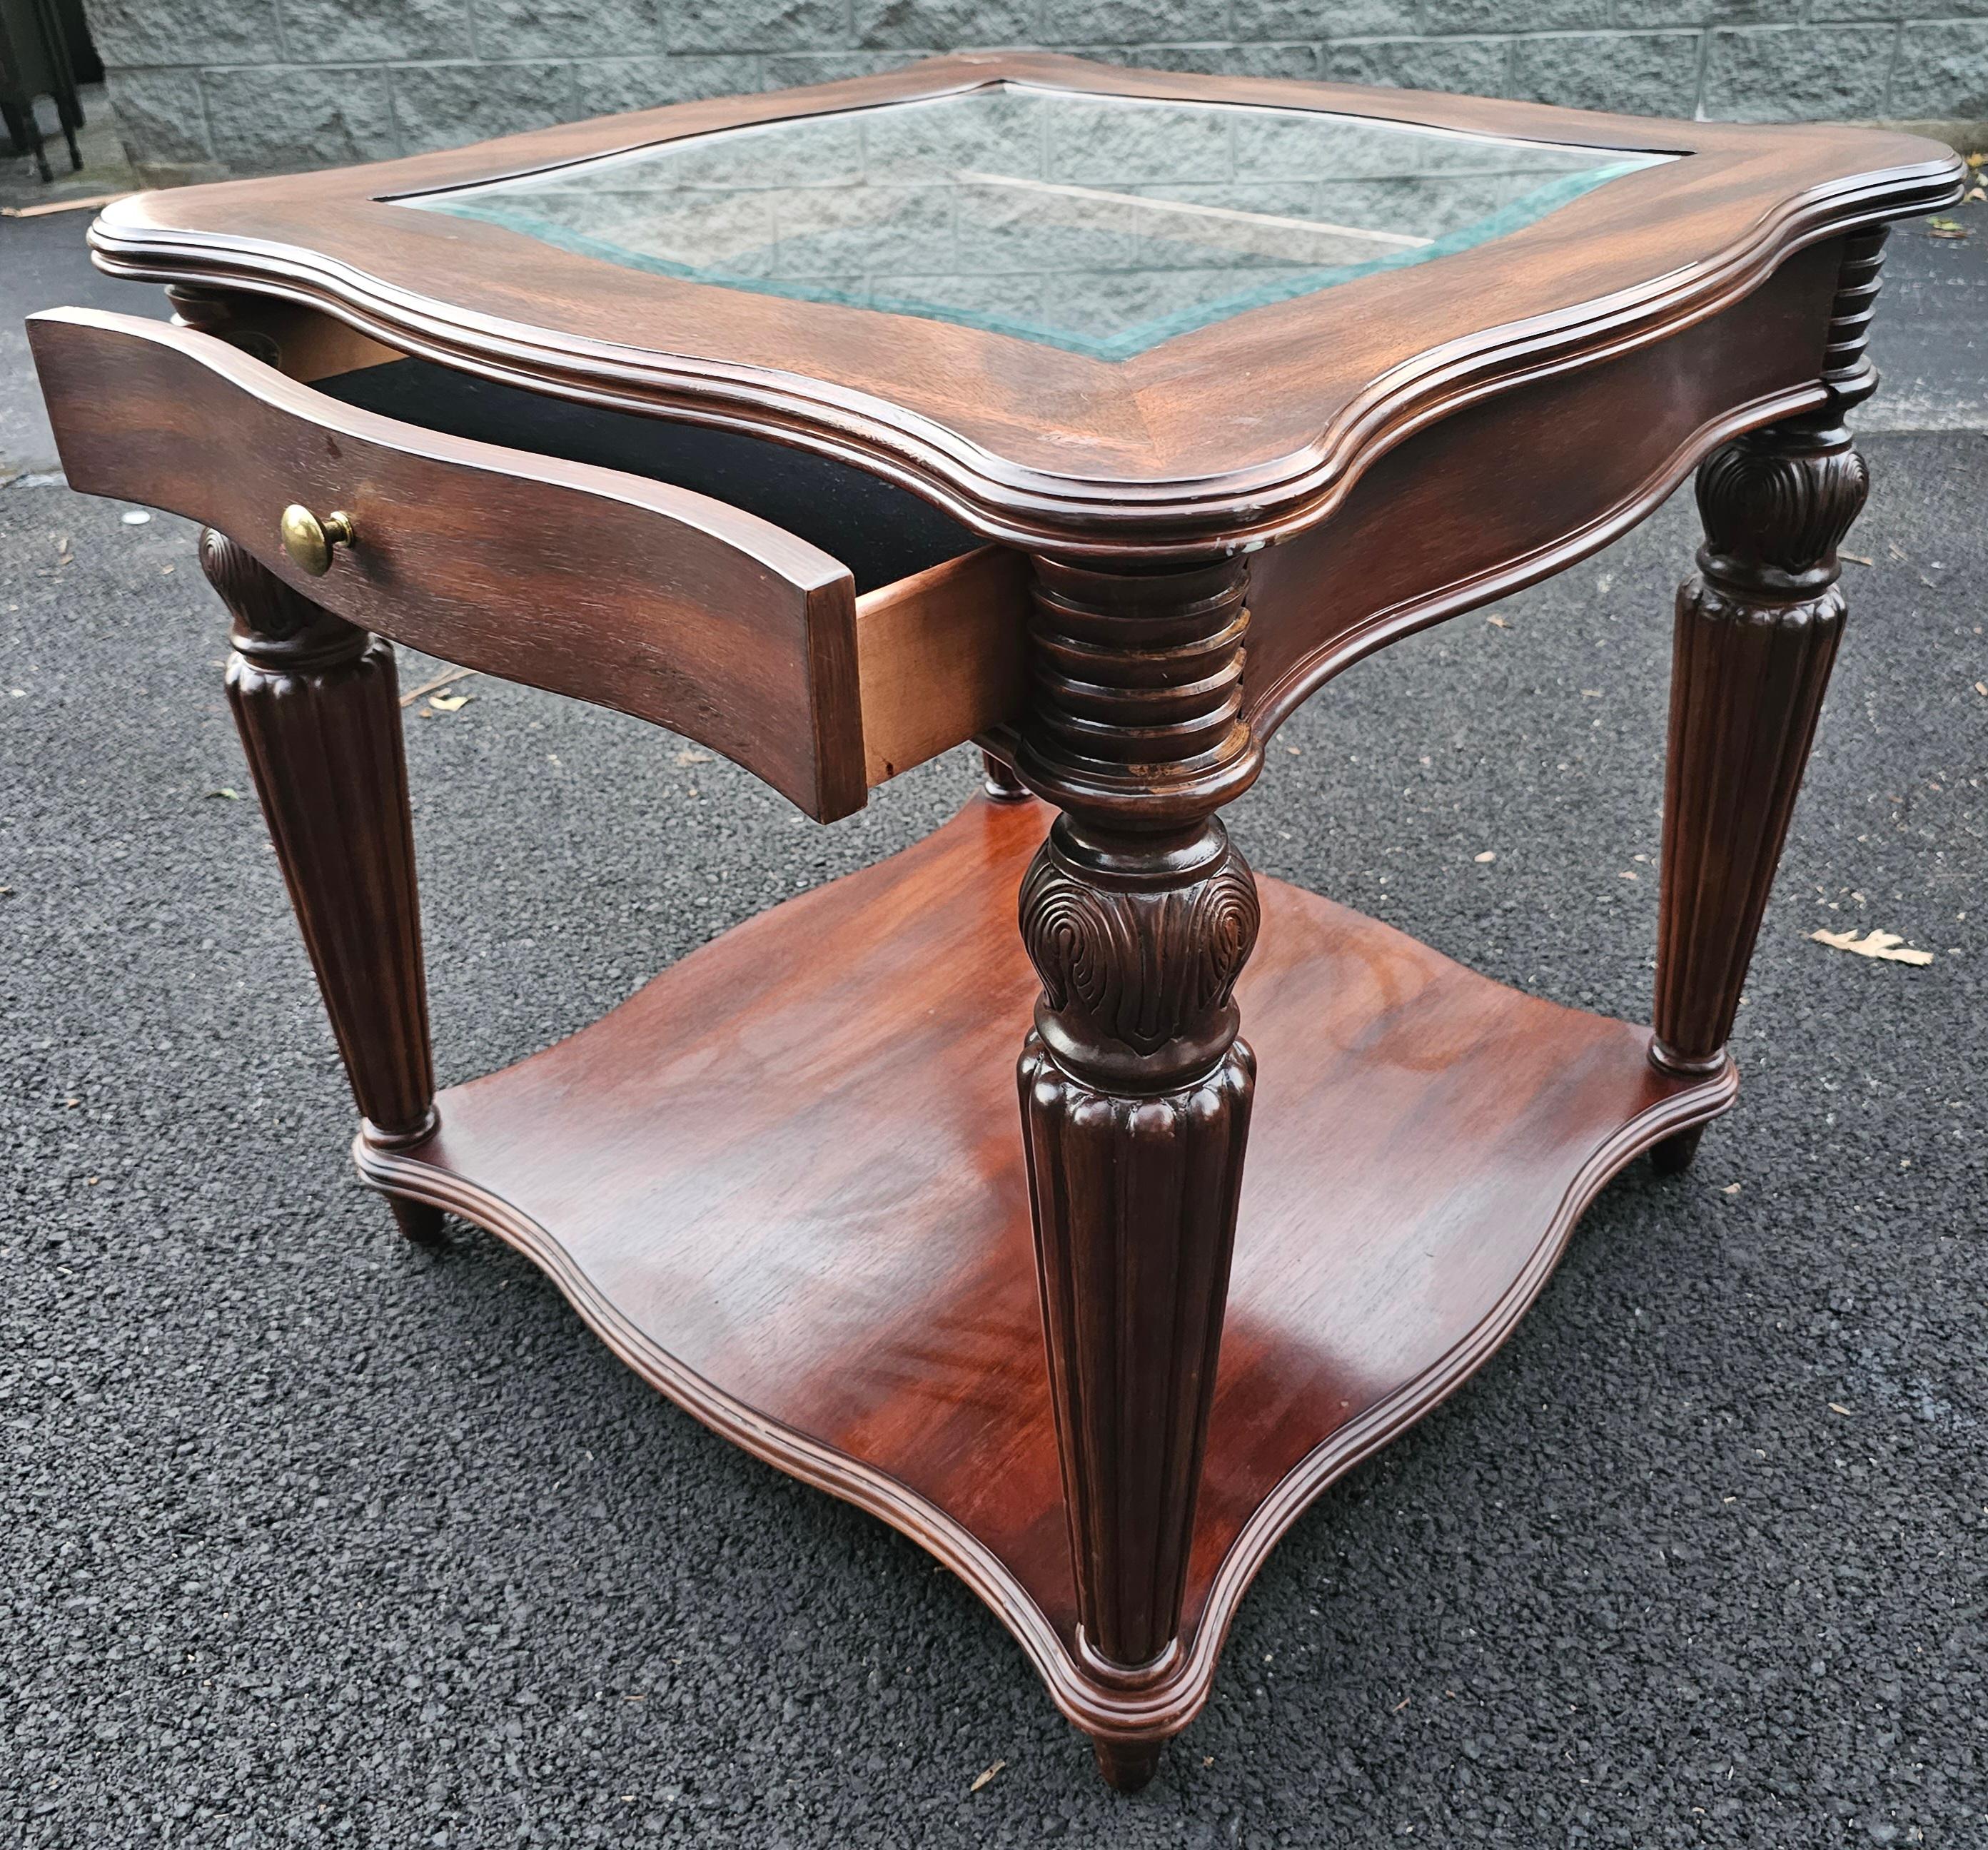 An exquisite magogany occasional display side table by Sherrill Furniture company. . Excellent vintage condition. Measures 29